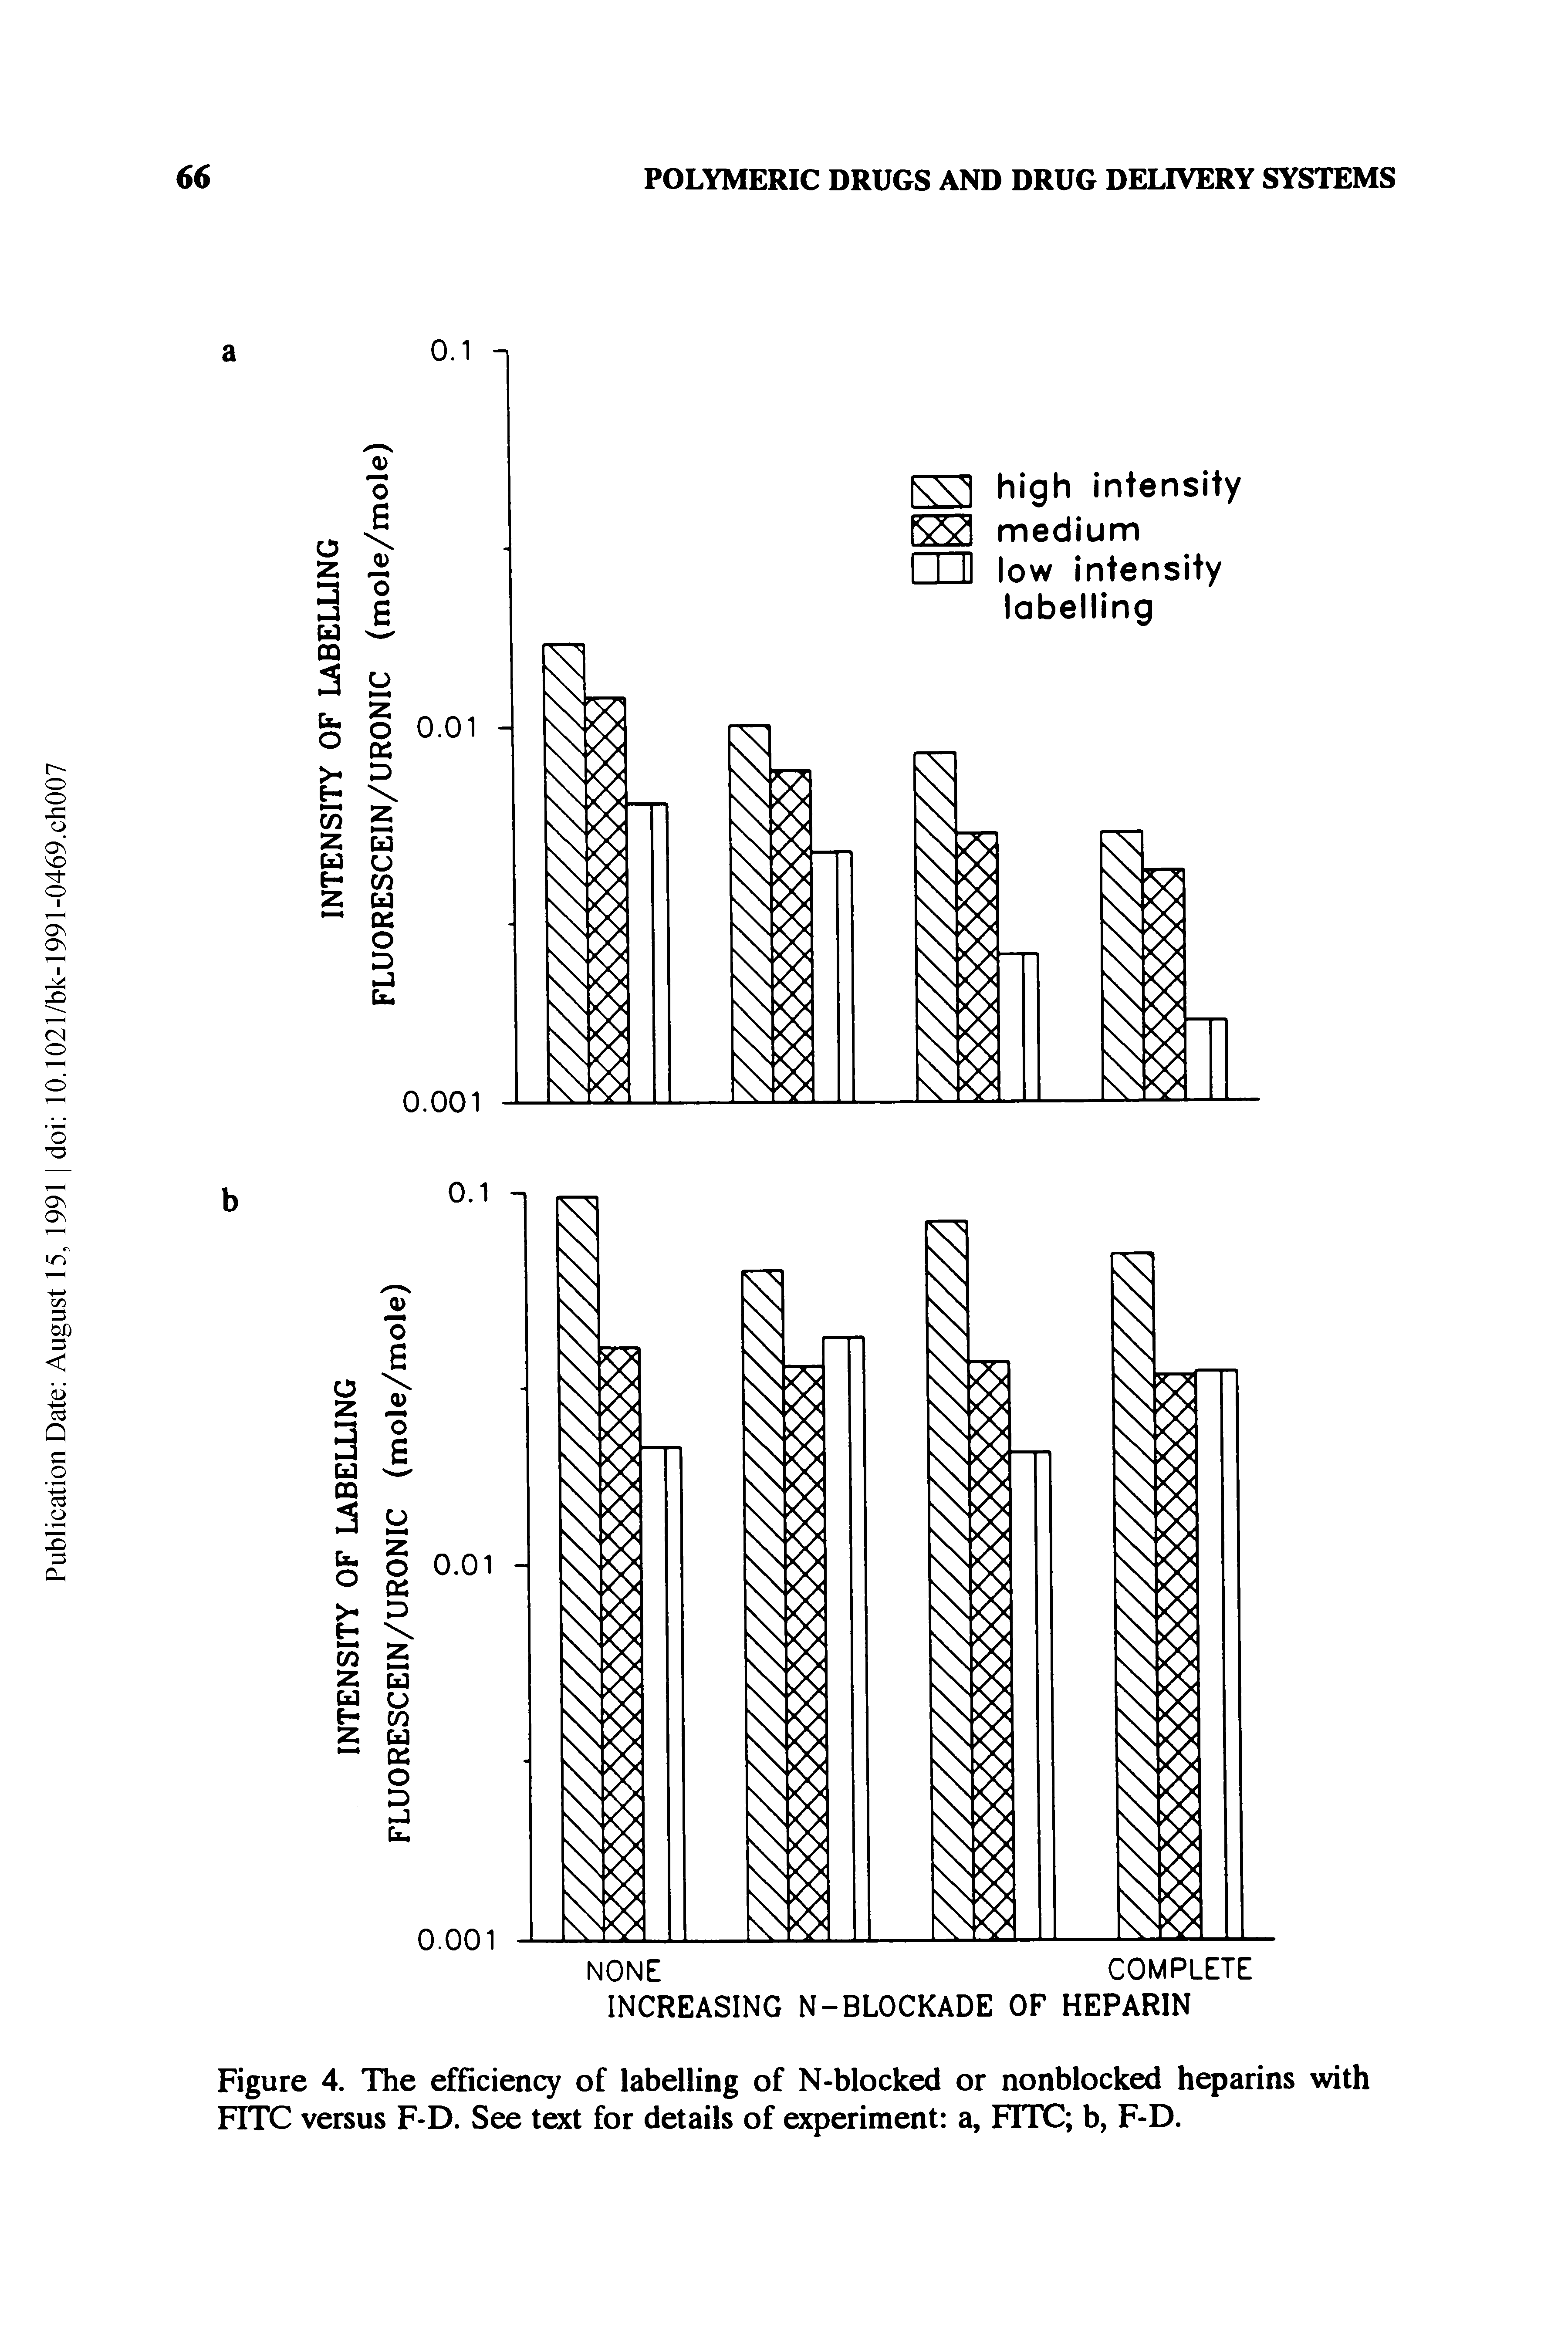 Figure 4. The efficiency of labelling of N-blocked or nonblocked heparins with FITC versus F-D. See text for details of experiment a, F1TC b, F-D.